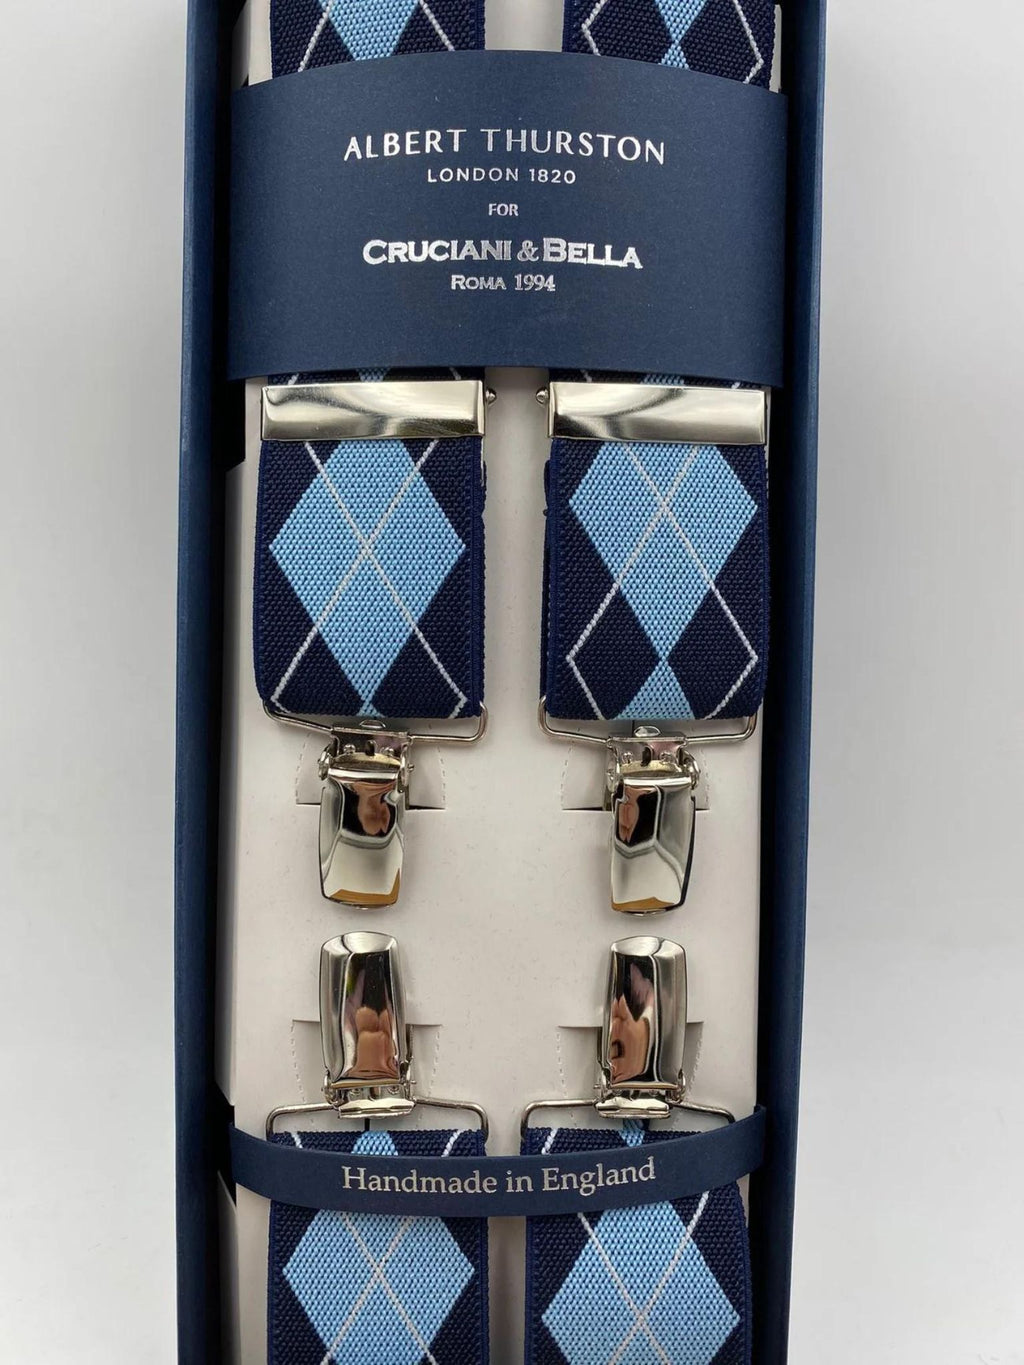 Albert Thurston for Cruciani & Bella Made in England Clip on Adjustable Sizing 35 mm elastic braces Blue, Light Blue and White X-Shaped Nickel Fittings Size: L